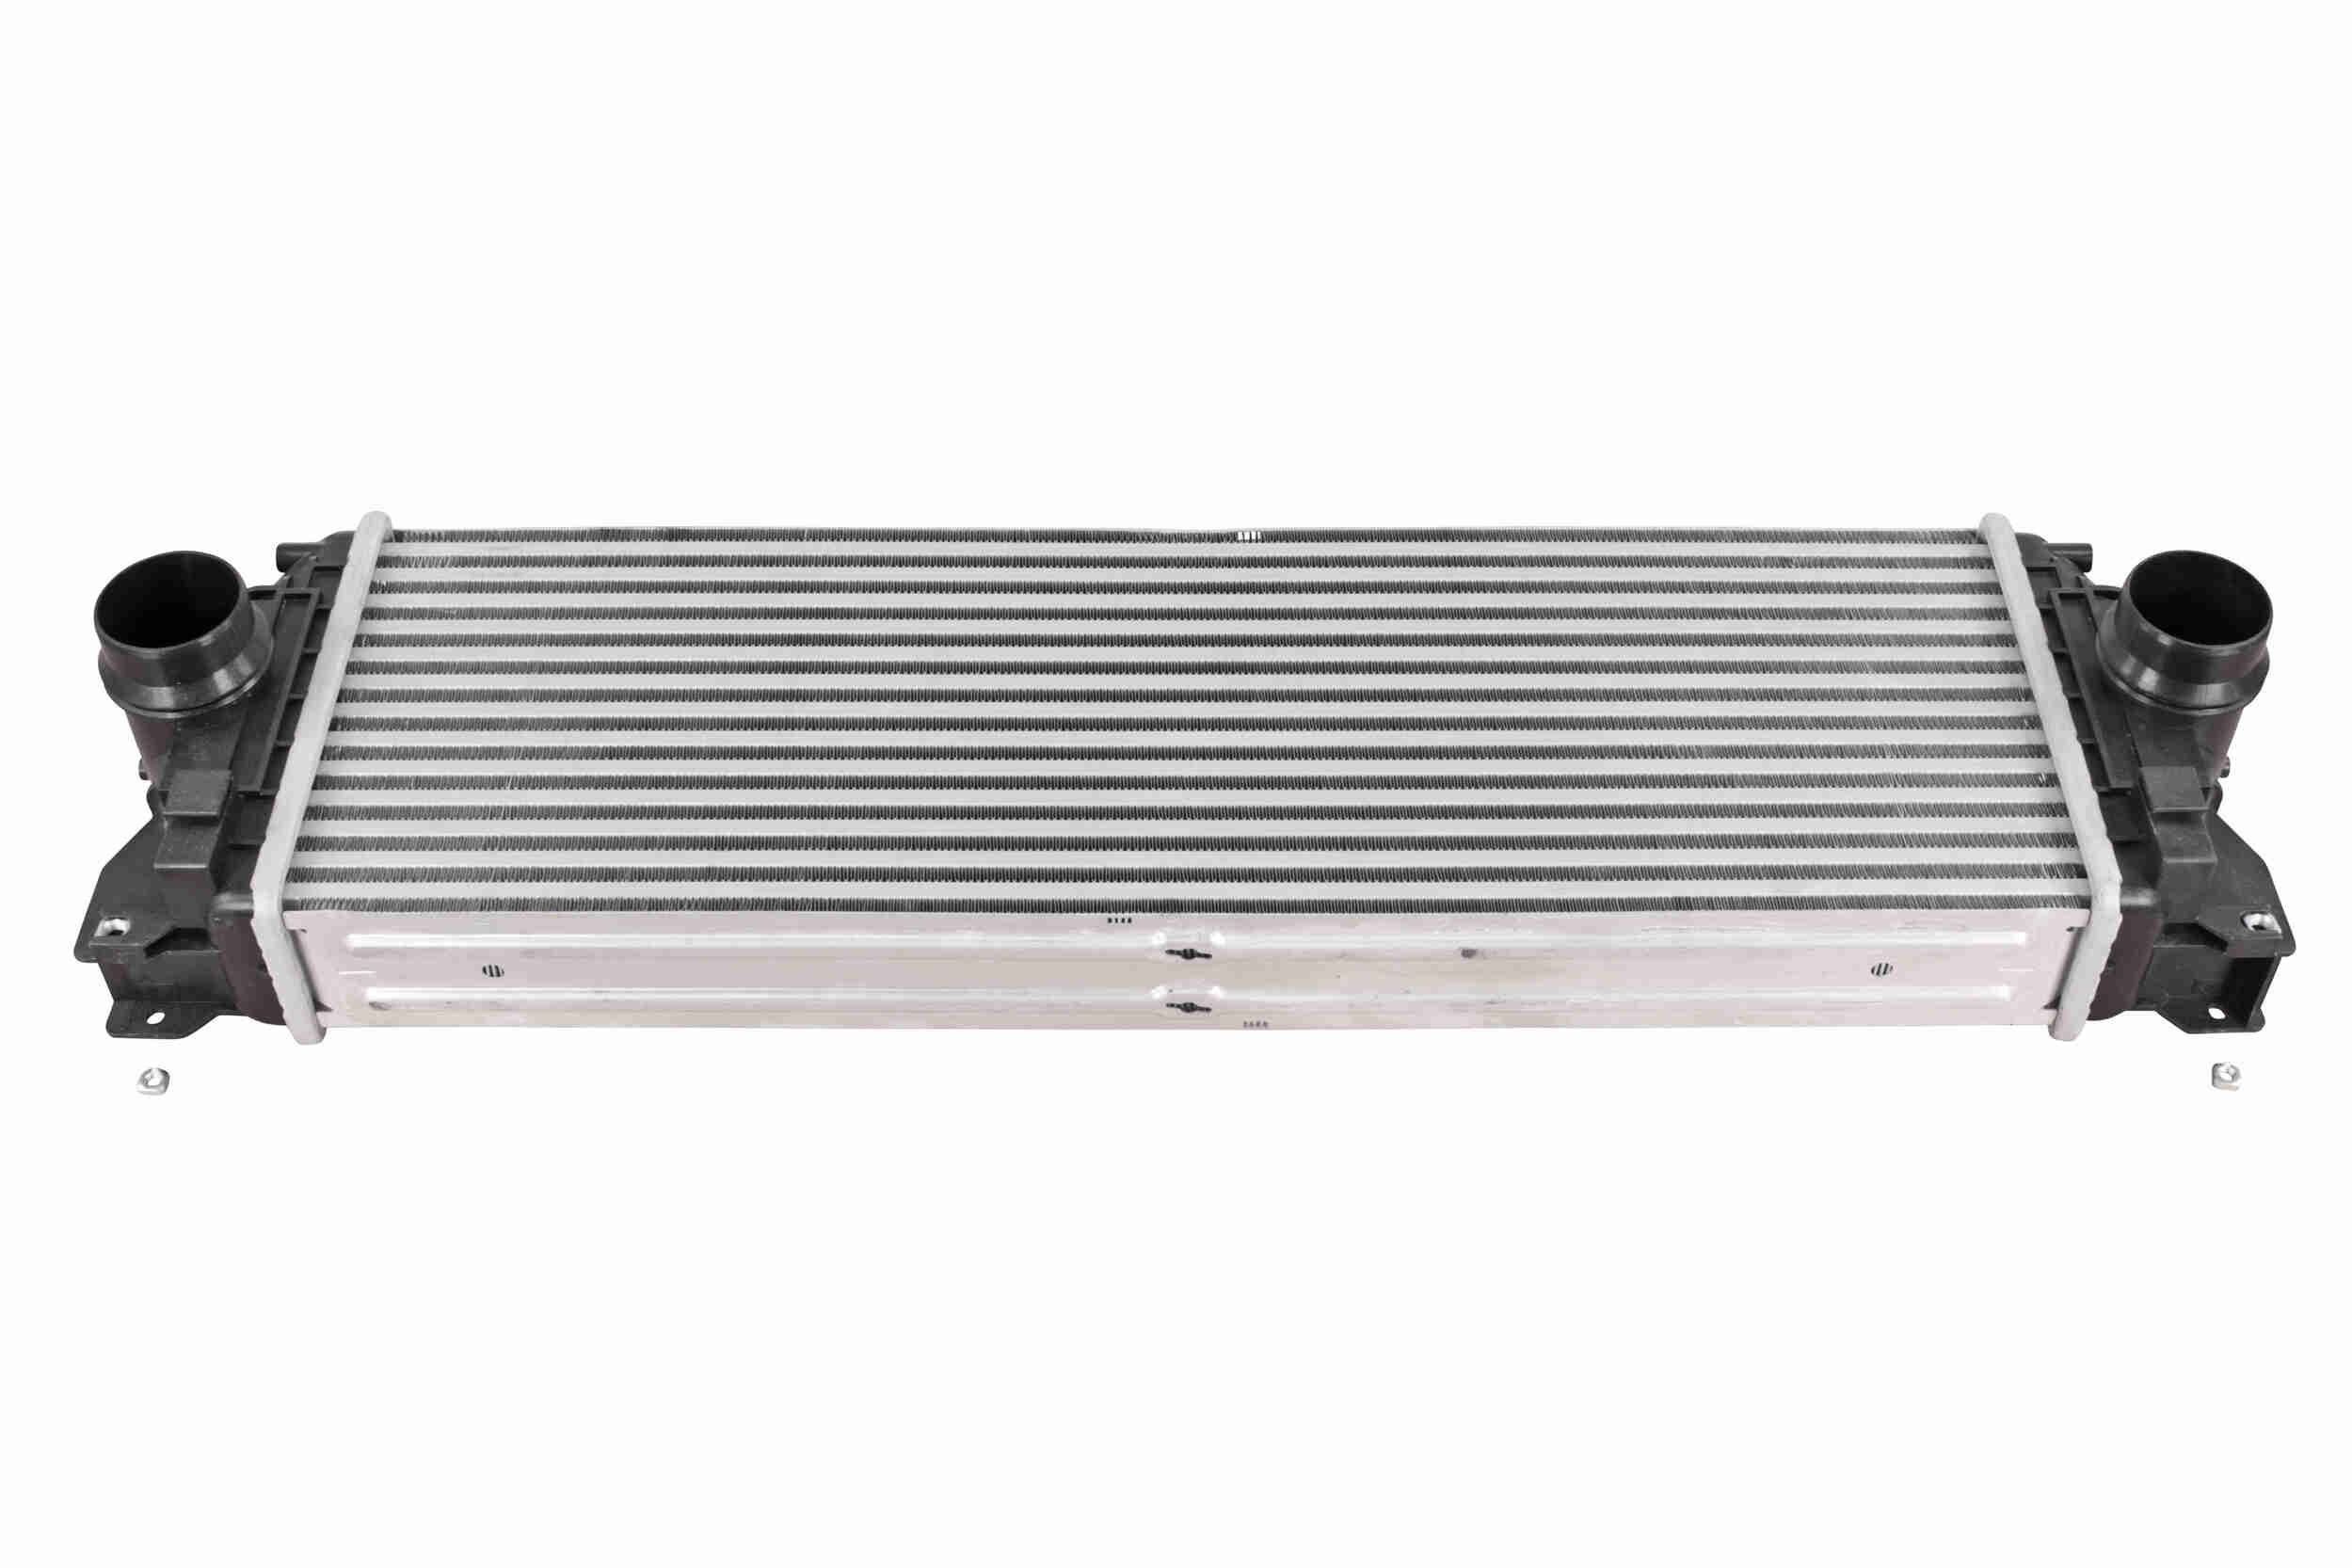 Mercedes E-Class Intercooler charger 17234030 VEMO V30-60-1354 online buy